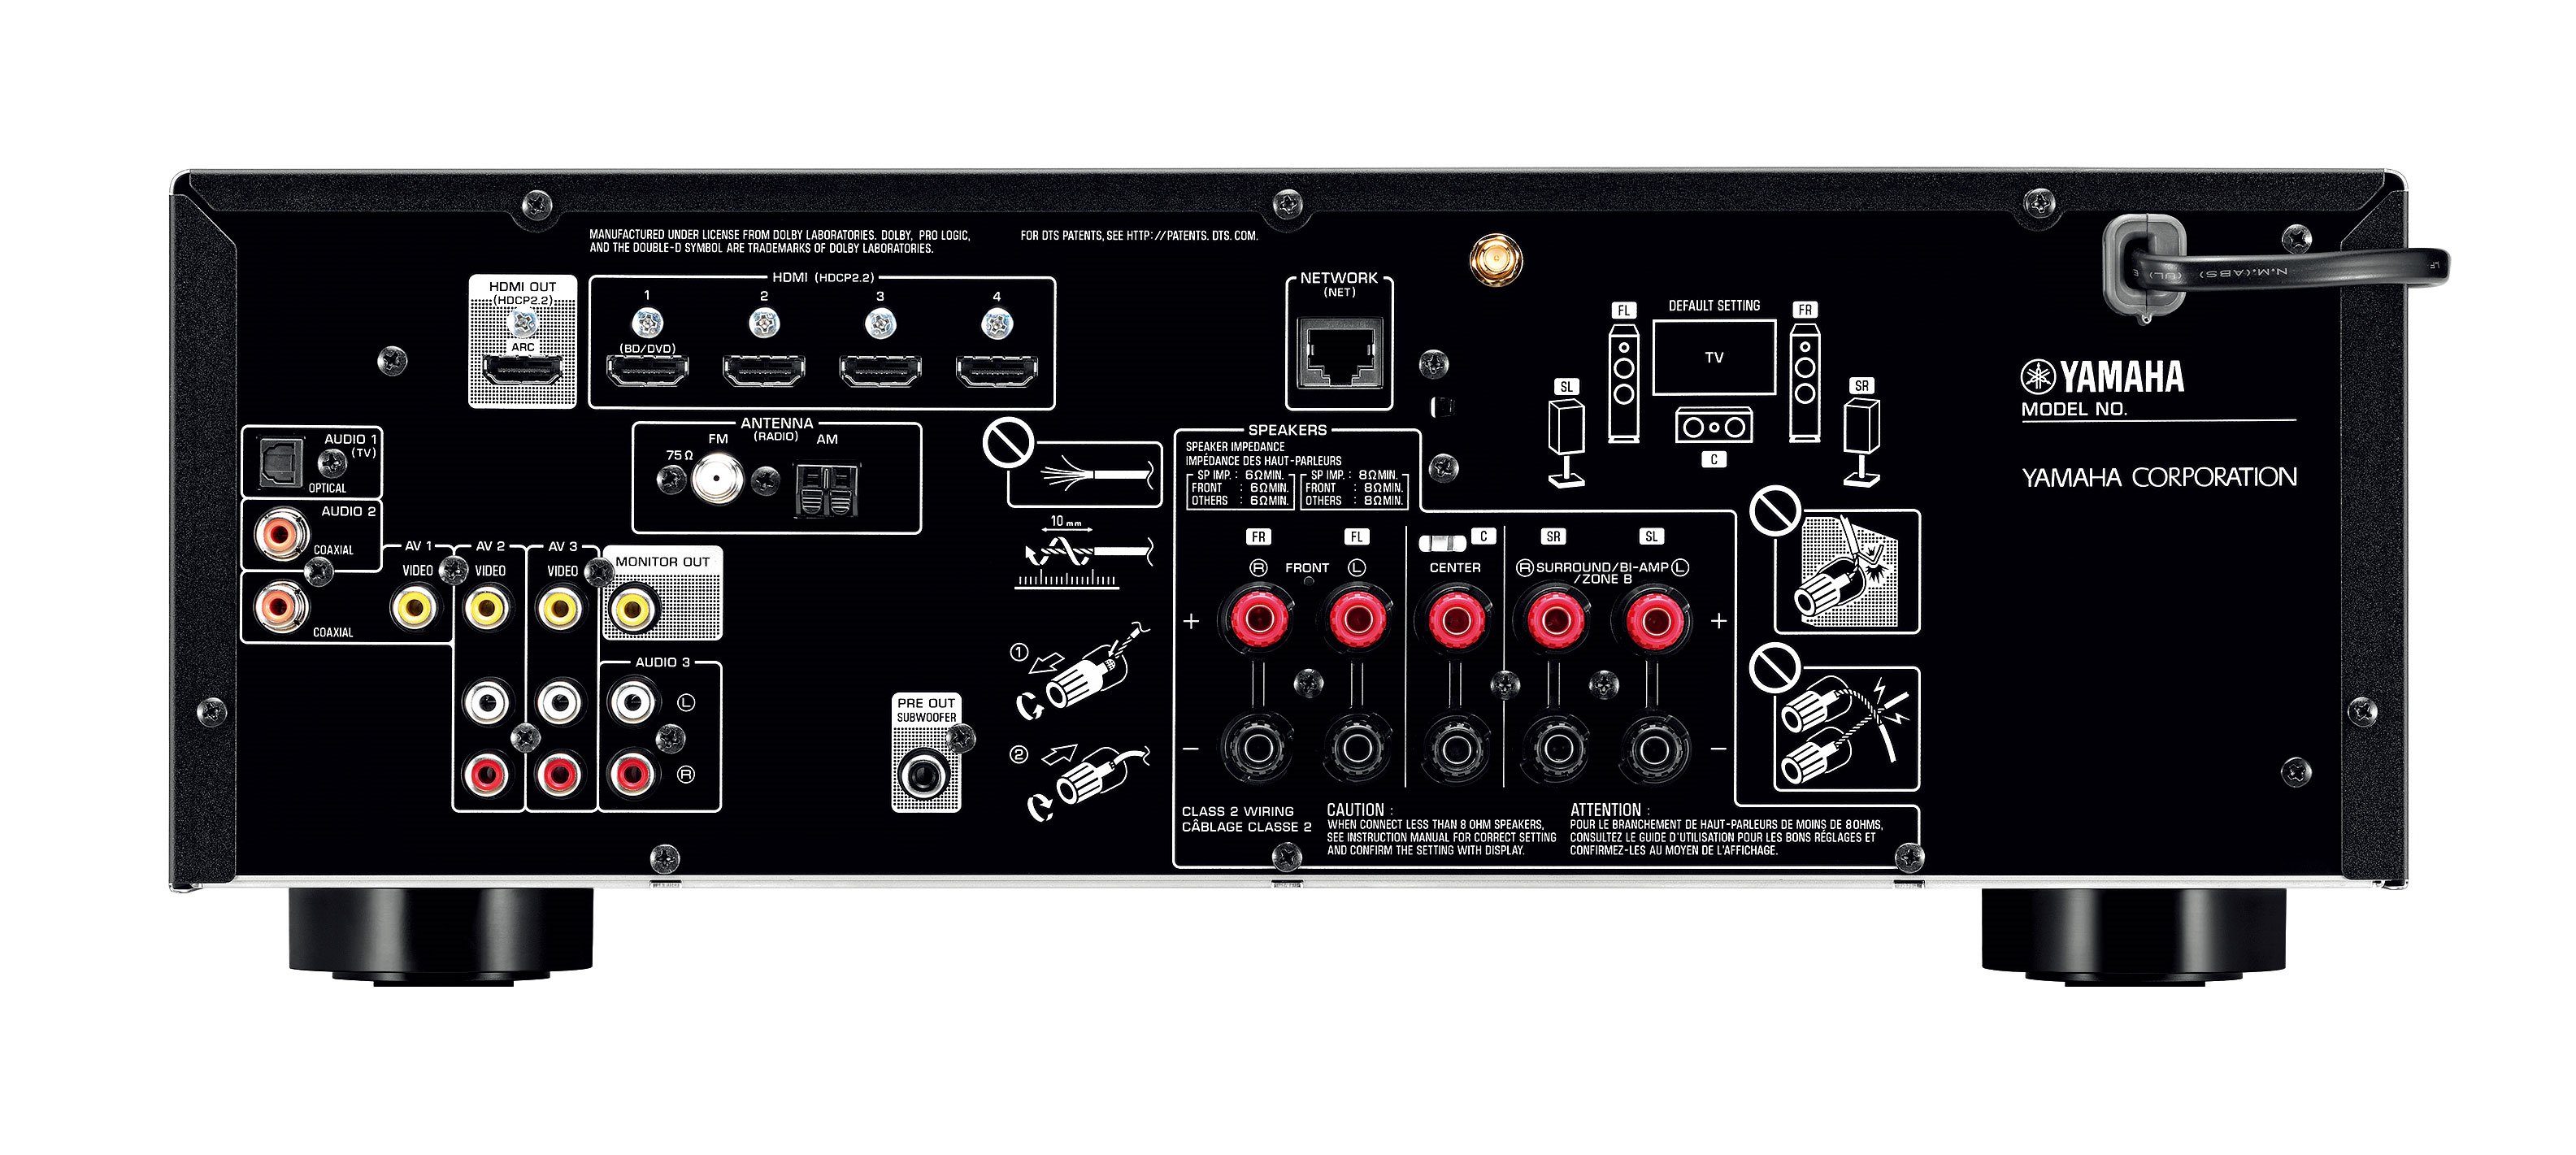 RX-V483 - Overview - AV Receivers - Audio & Visual - Products 